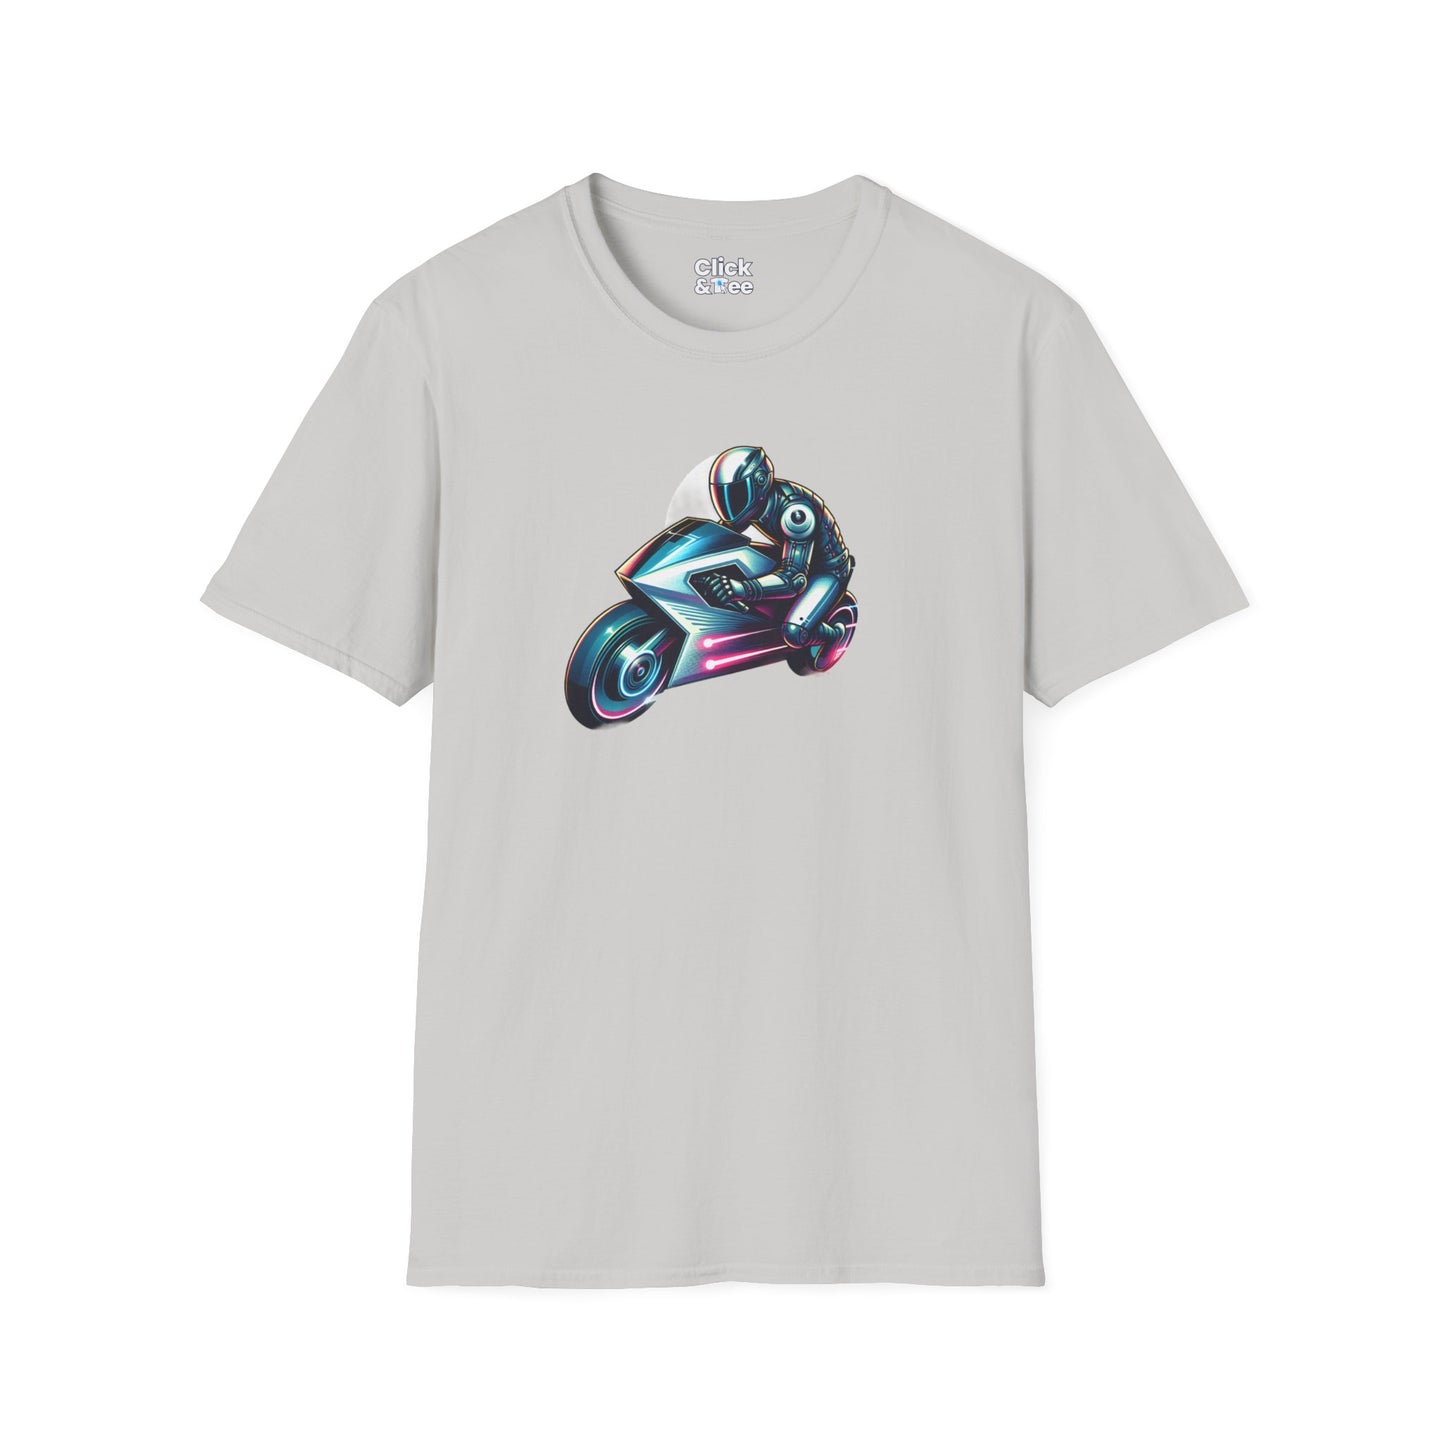 Synthwave T-Shirt - Futuristic Racer Riding a futuristic light bike - Synthwave Style T-Shirt